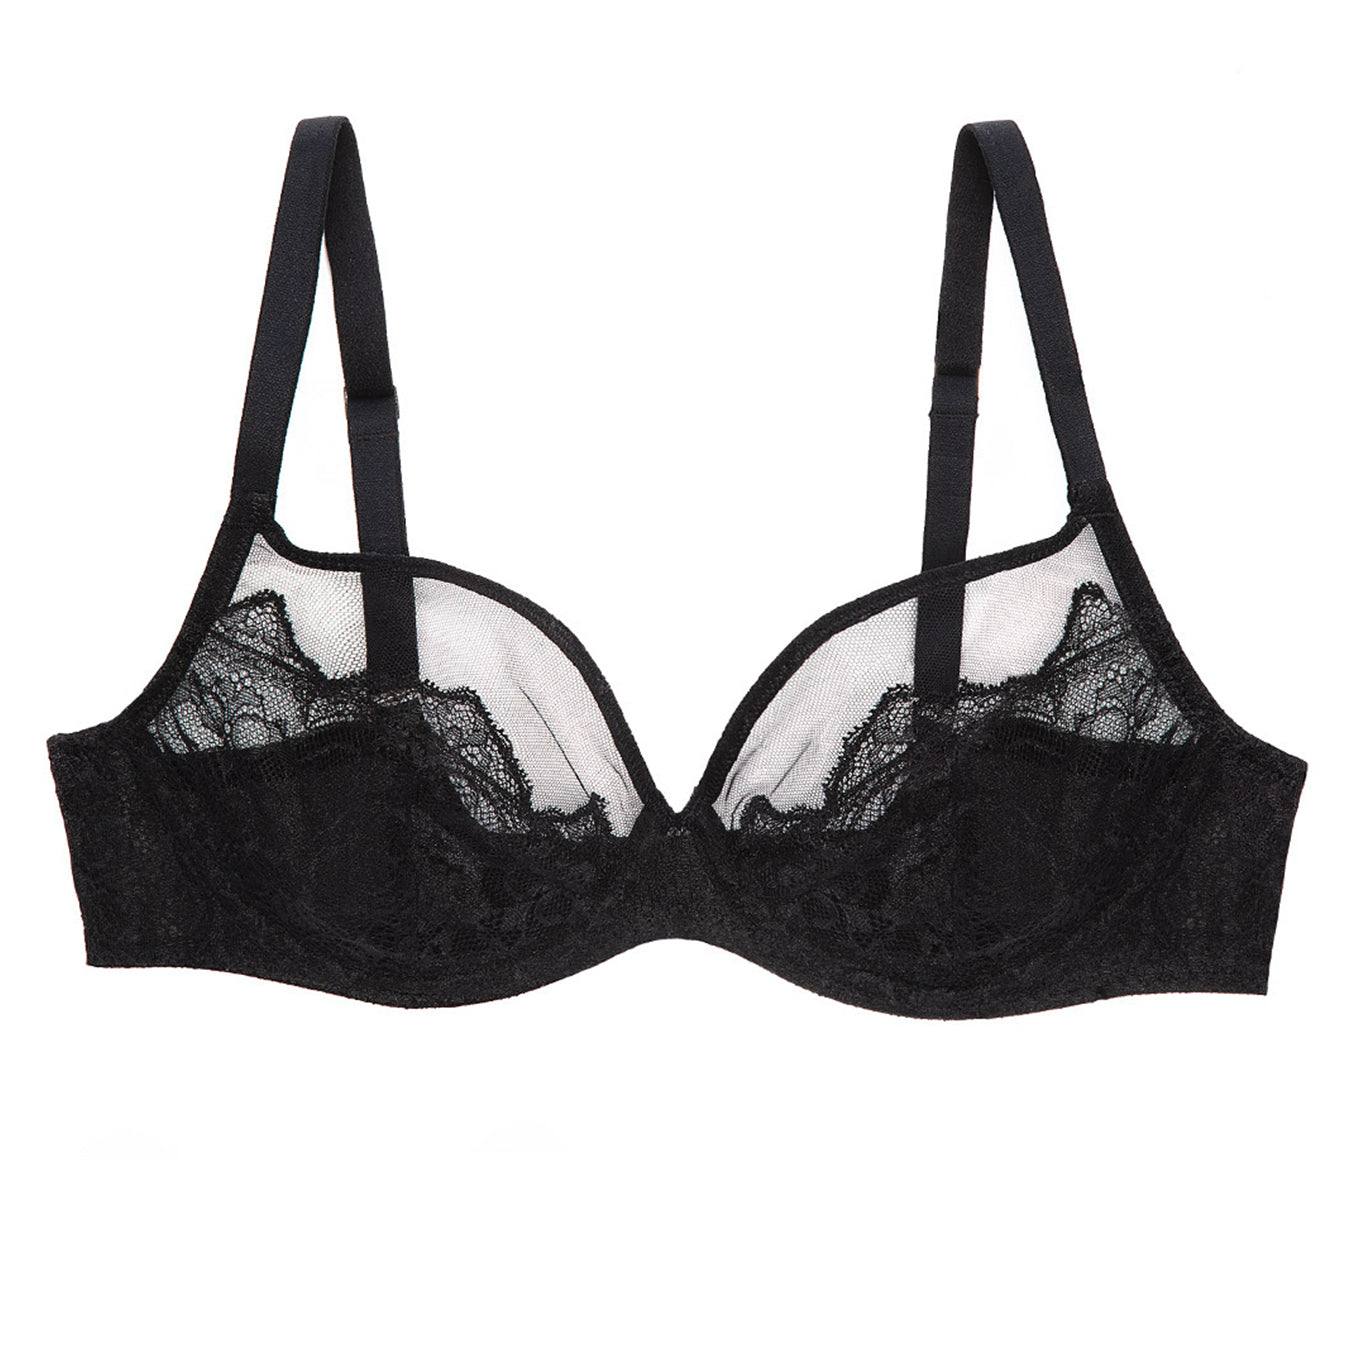 Durable CUUP Bras The Plunge - Mesh, Vine lowest price - Cheap